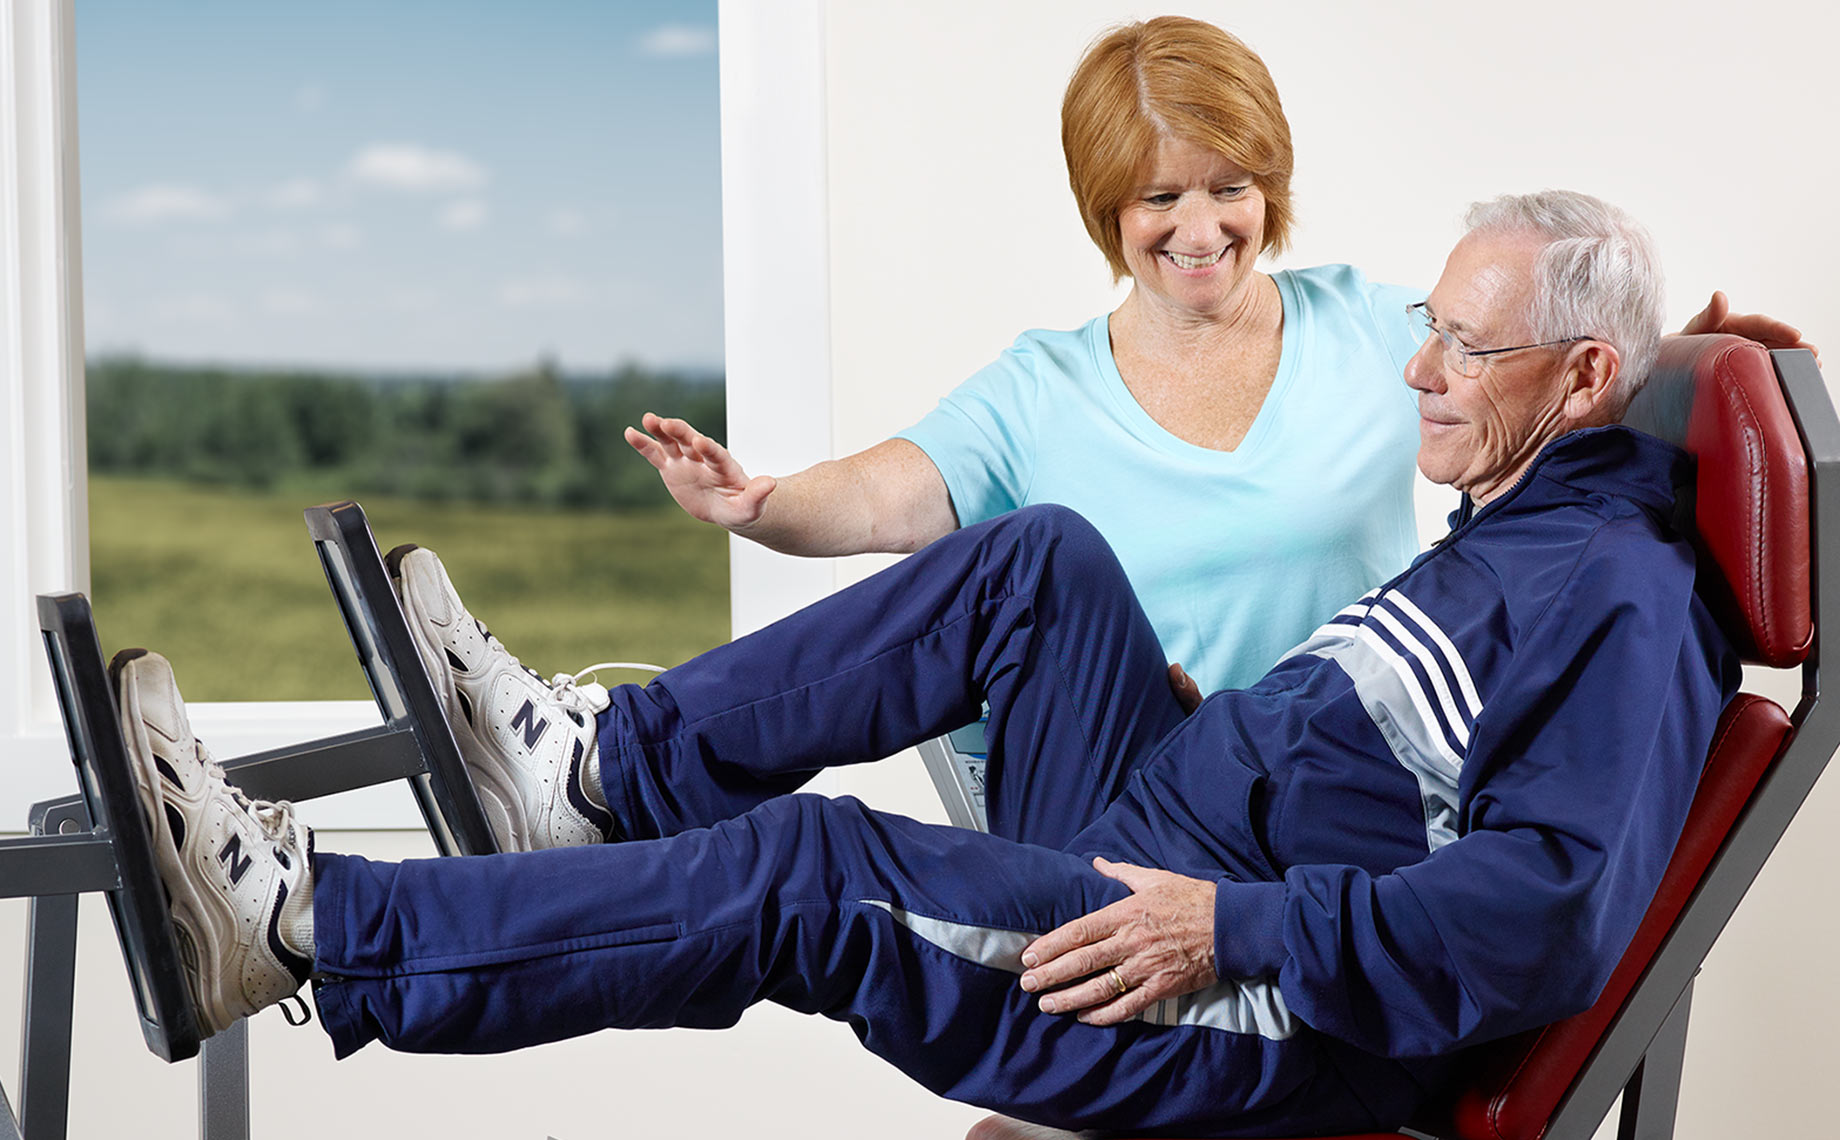 Exercise Instructor With Older Man 4_20_16_Fitness_Leg_Press_Edgewood_20886_F